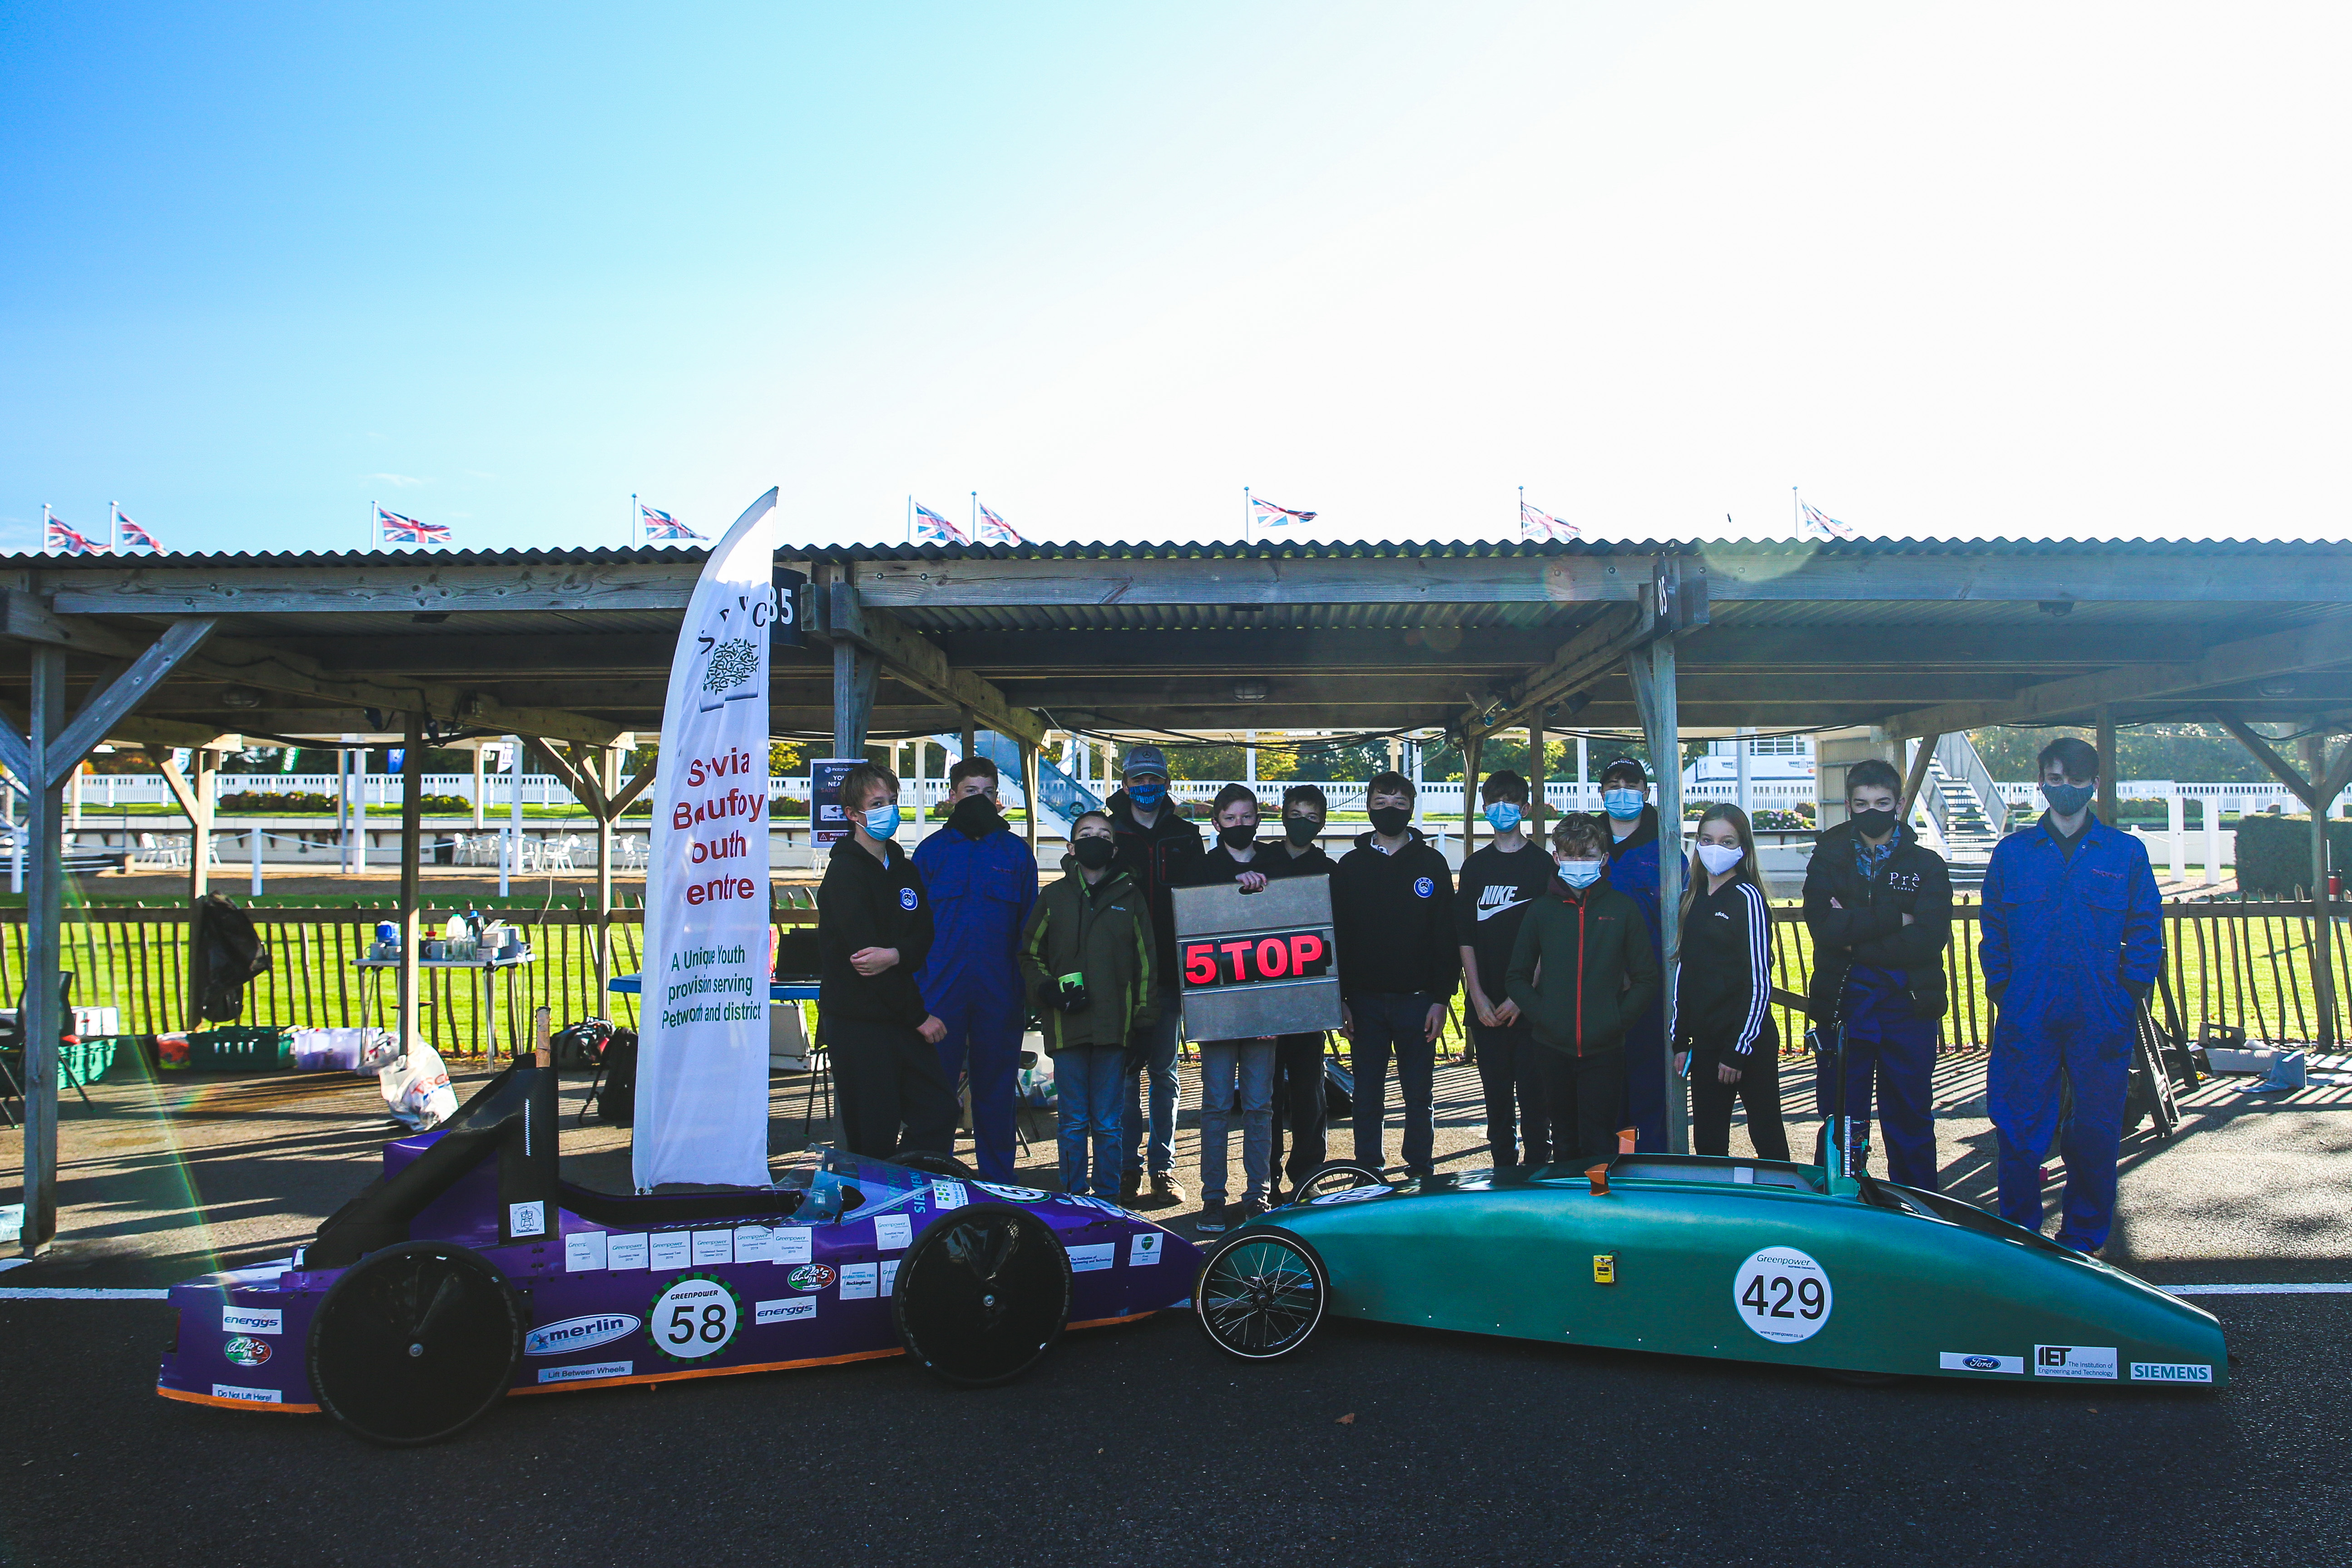 The Sylvia Beaufoy Centre team at the Greenpower event at Goodwood in October 2020